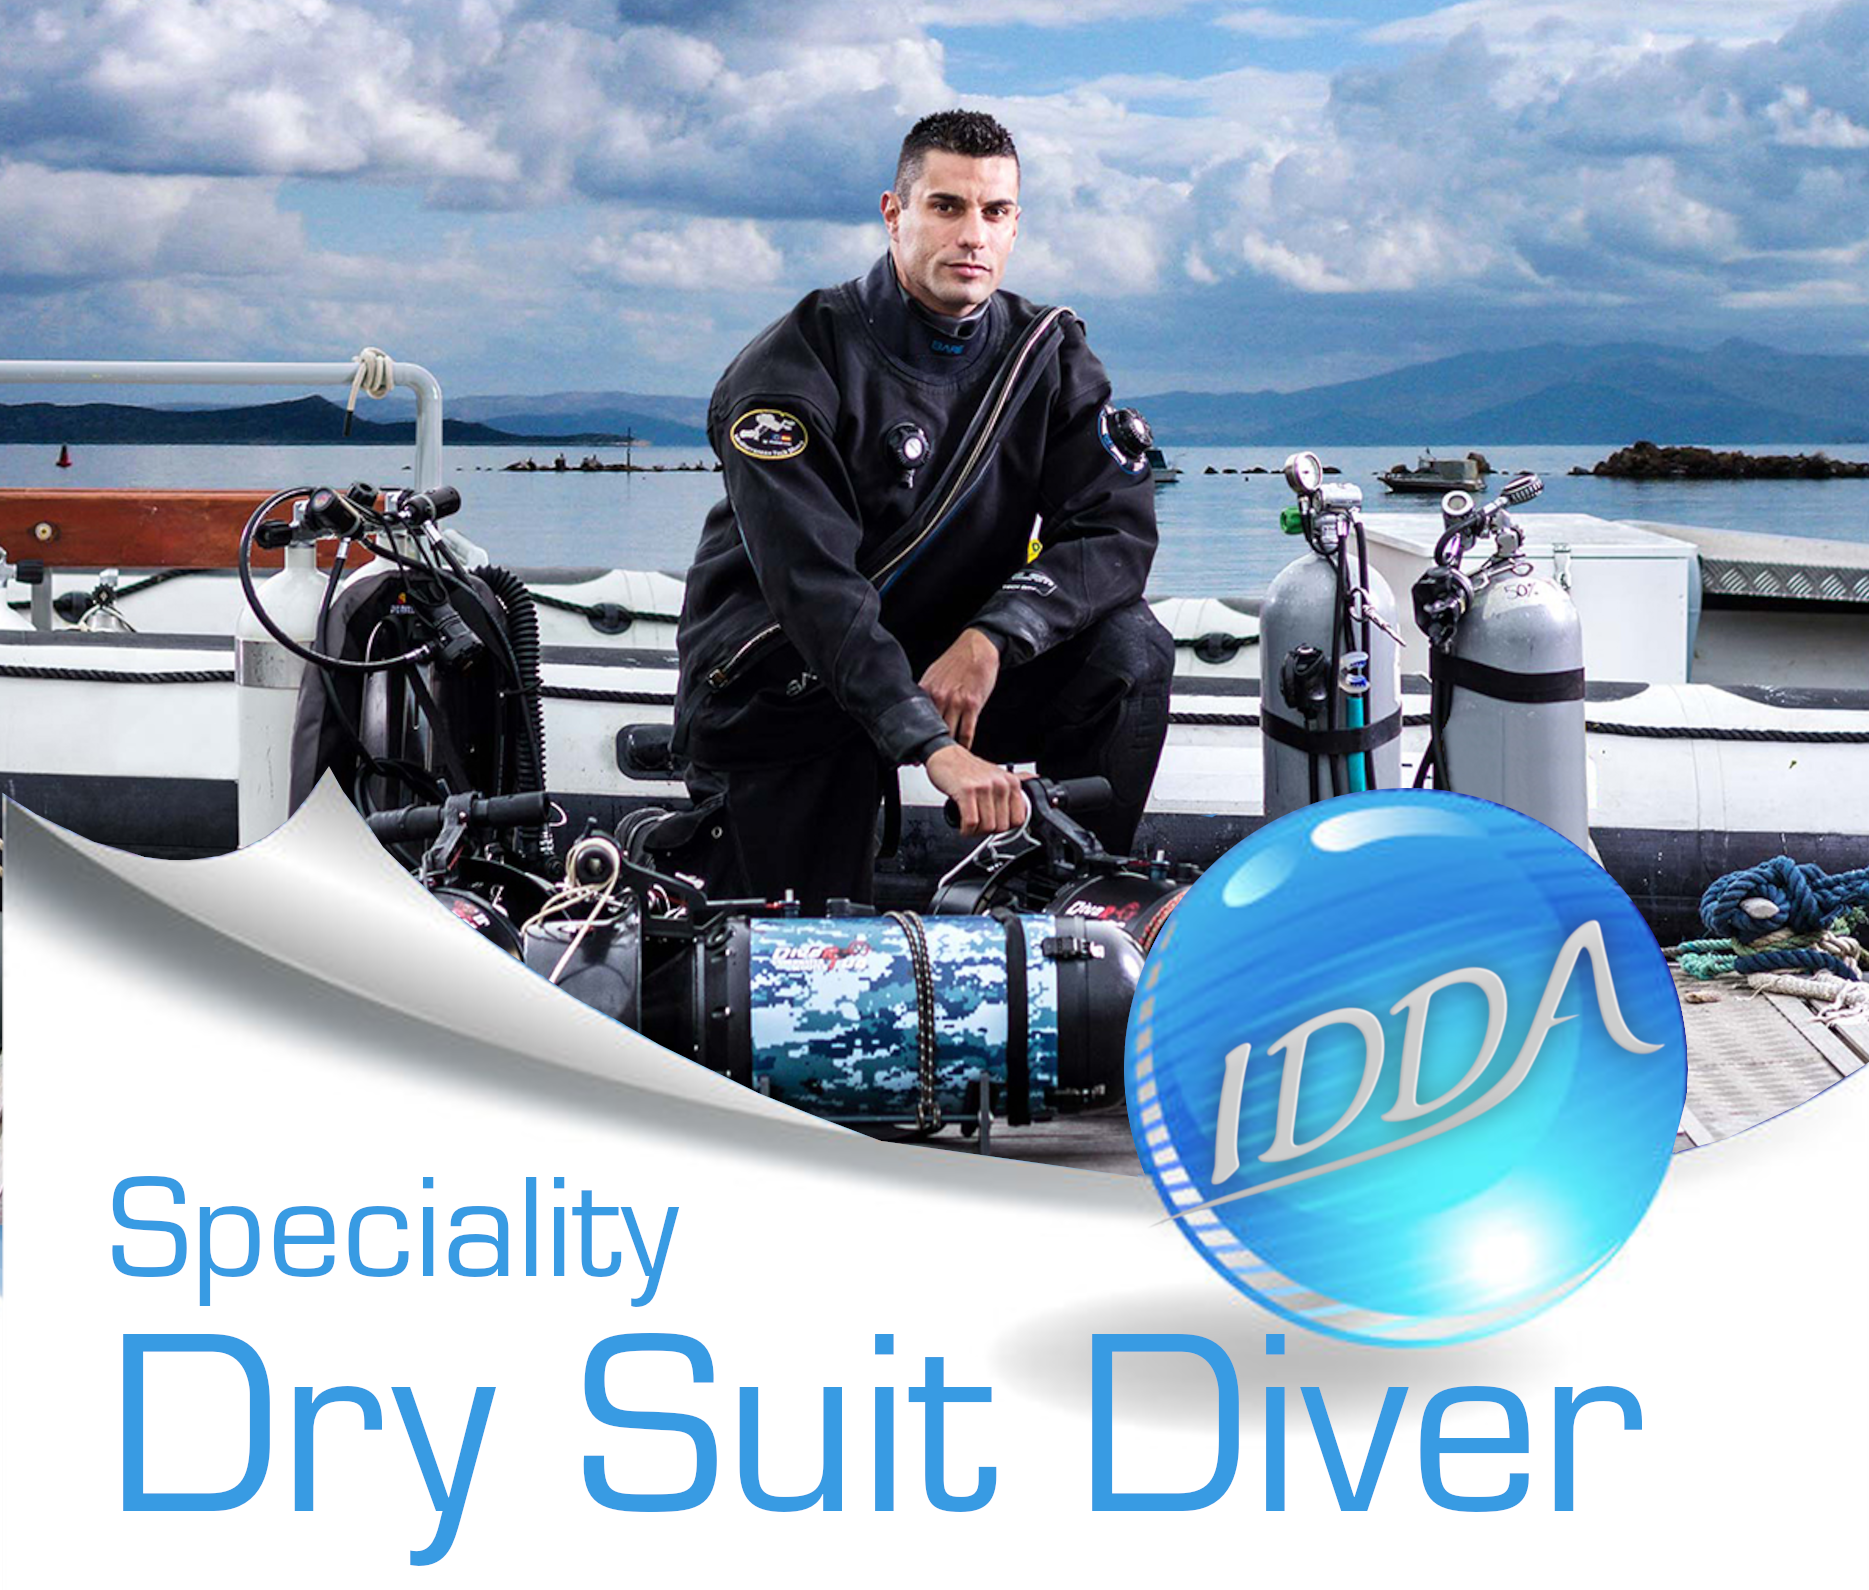 Speciality Dry Suit Diver